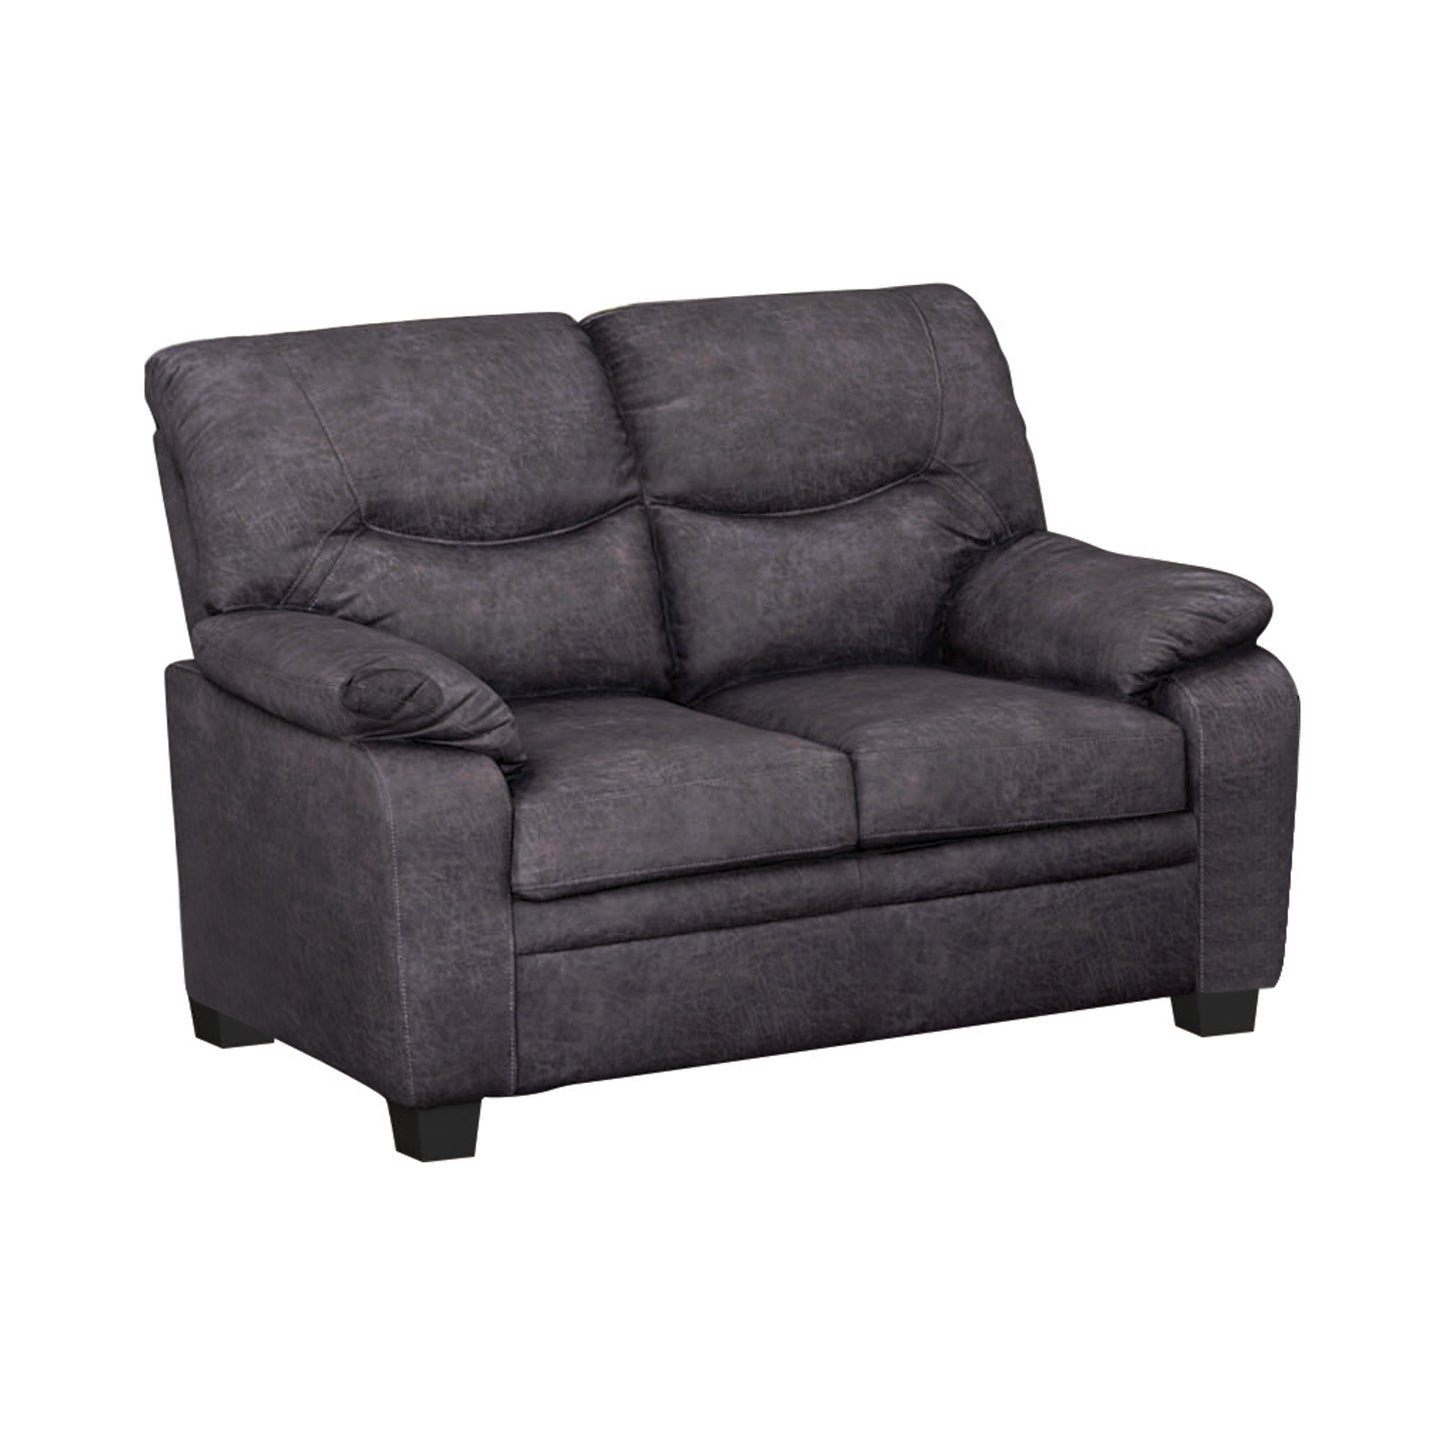 Meagan Pillow Top Arms Upholstered Loveseat Charcoal